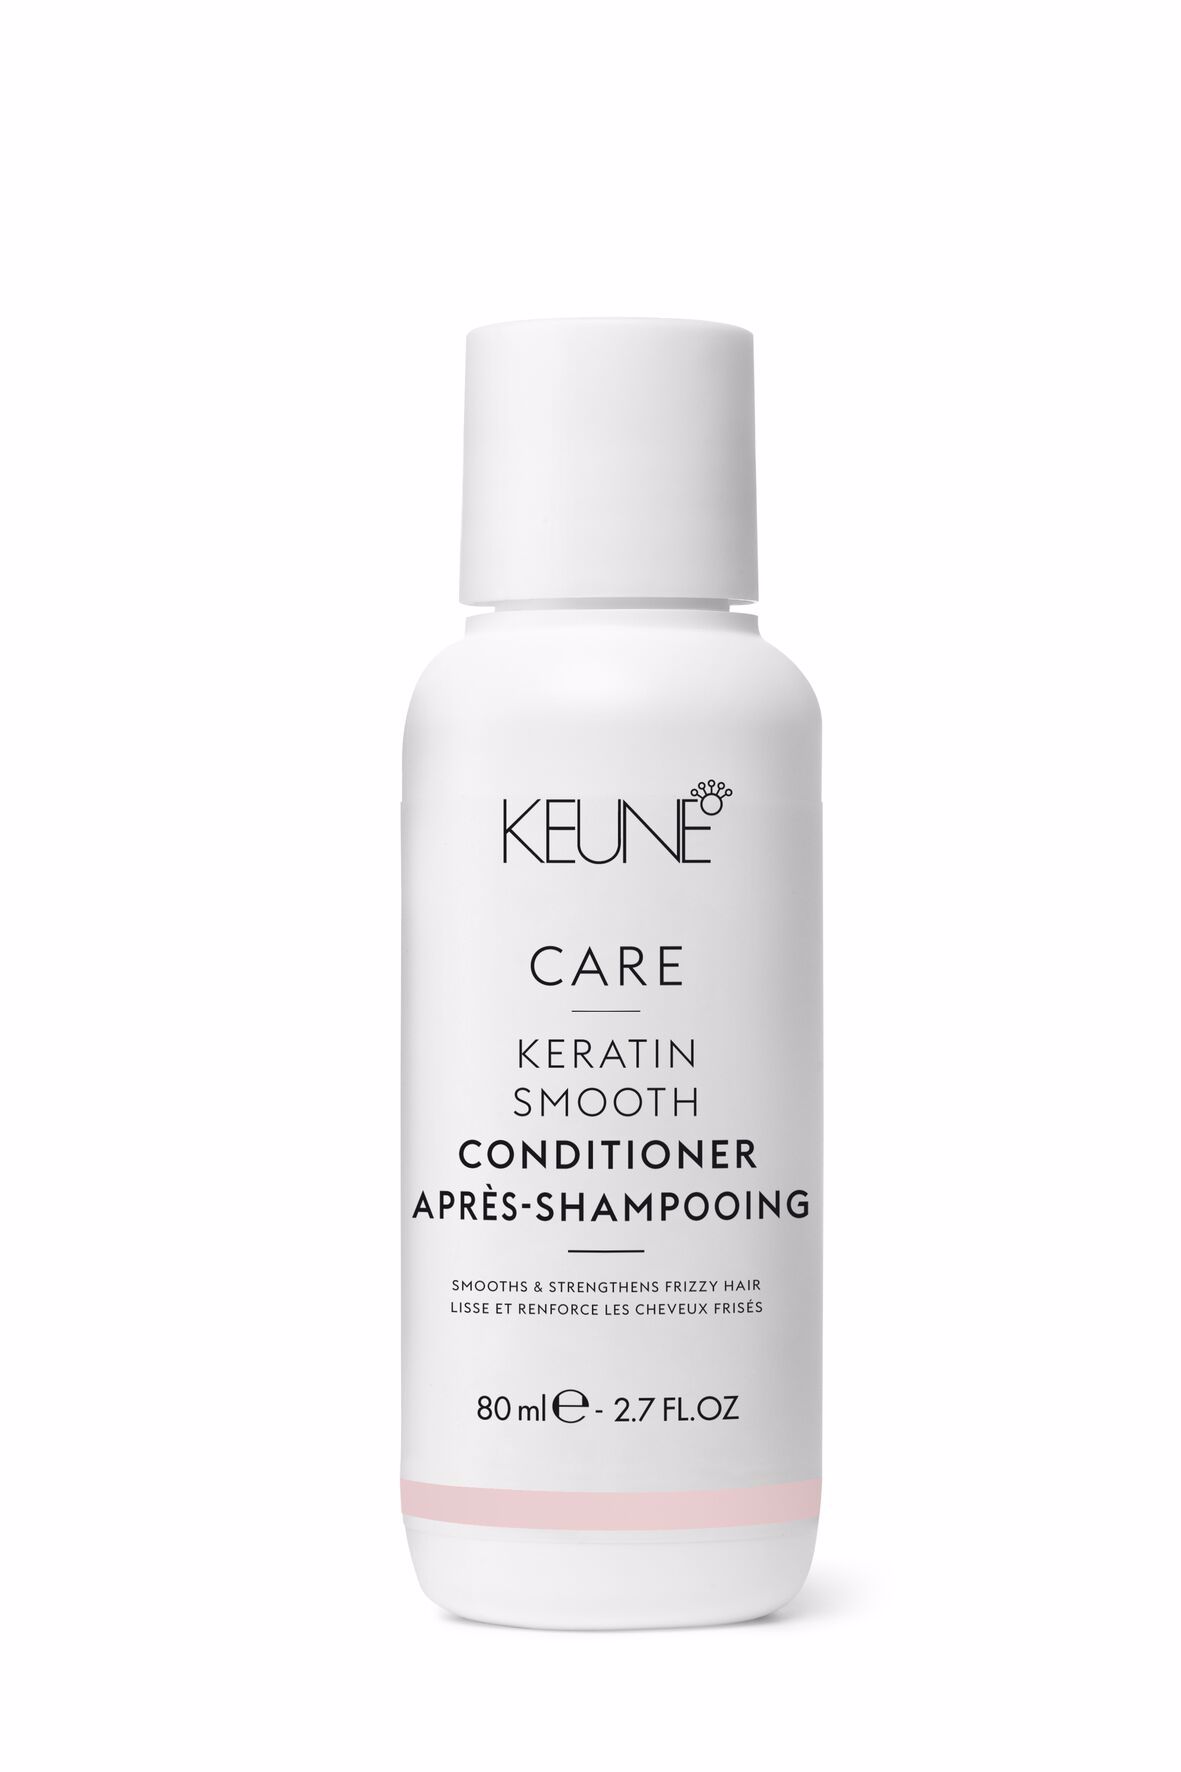 CARE Keratin Smooth Conditioner: Rich hair product with keratin, provitamin B5, and shea butter for shiny, easily manageable hair. Protection against frizz and hair breakage. Available on keune.ch.